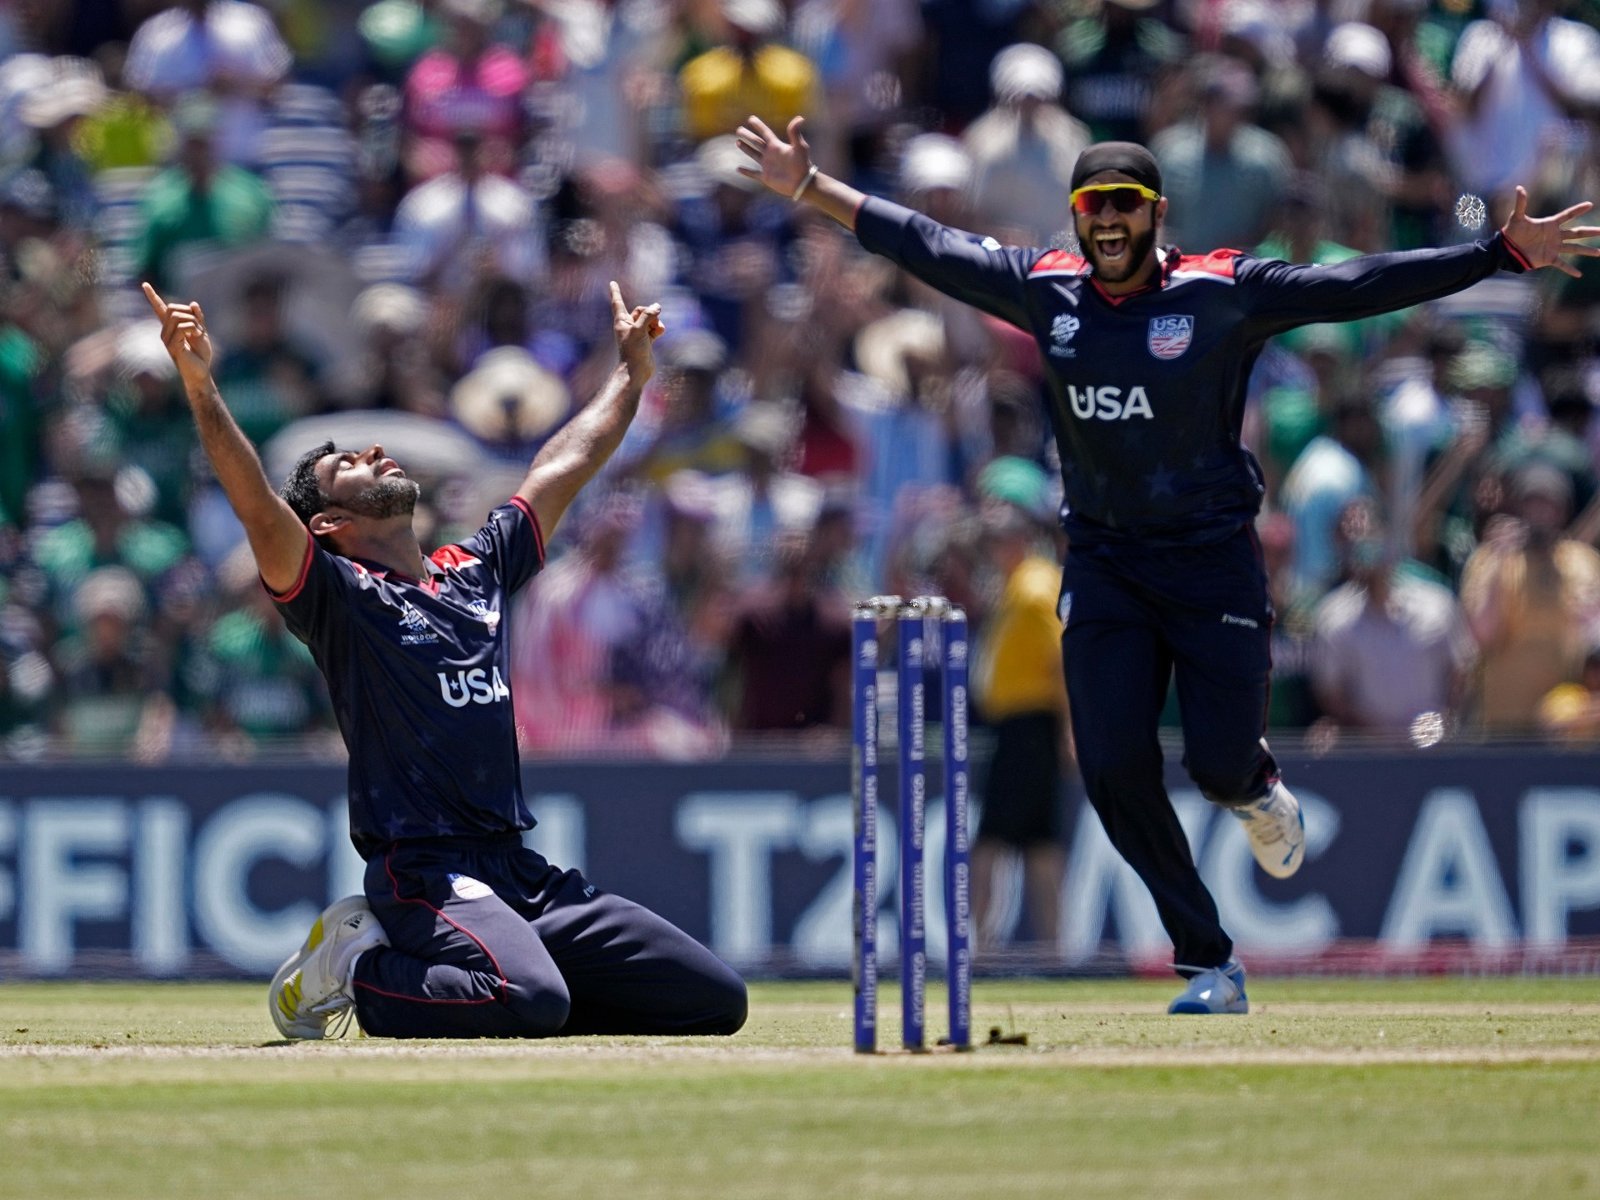 USA vs Pakistan: What are the five biggest upsets in T20 World Cup history? | ICC Men’s T20 World Cup News